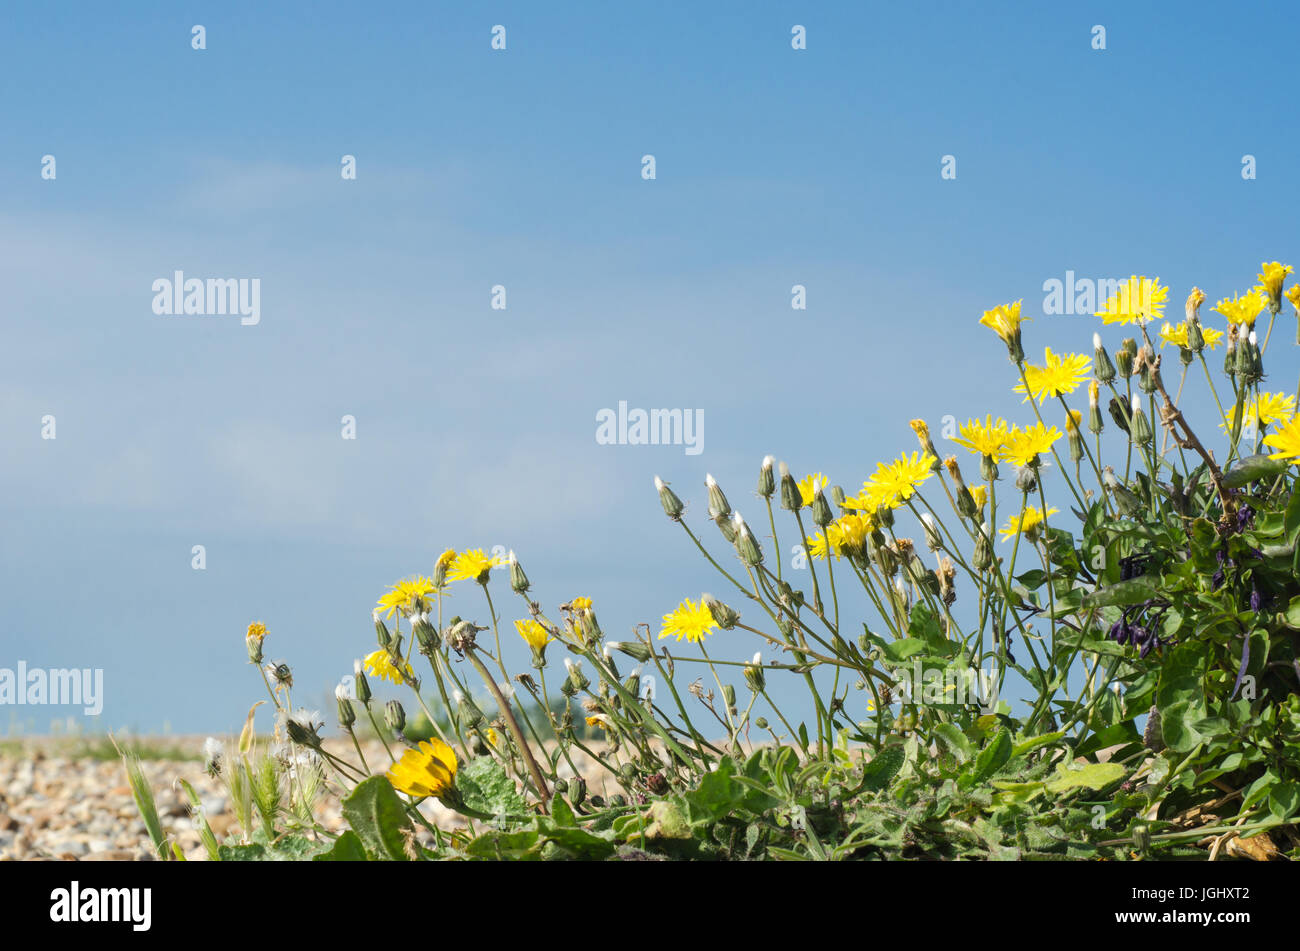 Dandelions growing wild on a pebble beach against a bright blue sky. Stock Photo